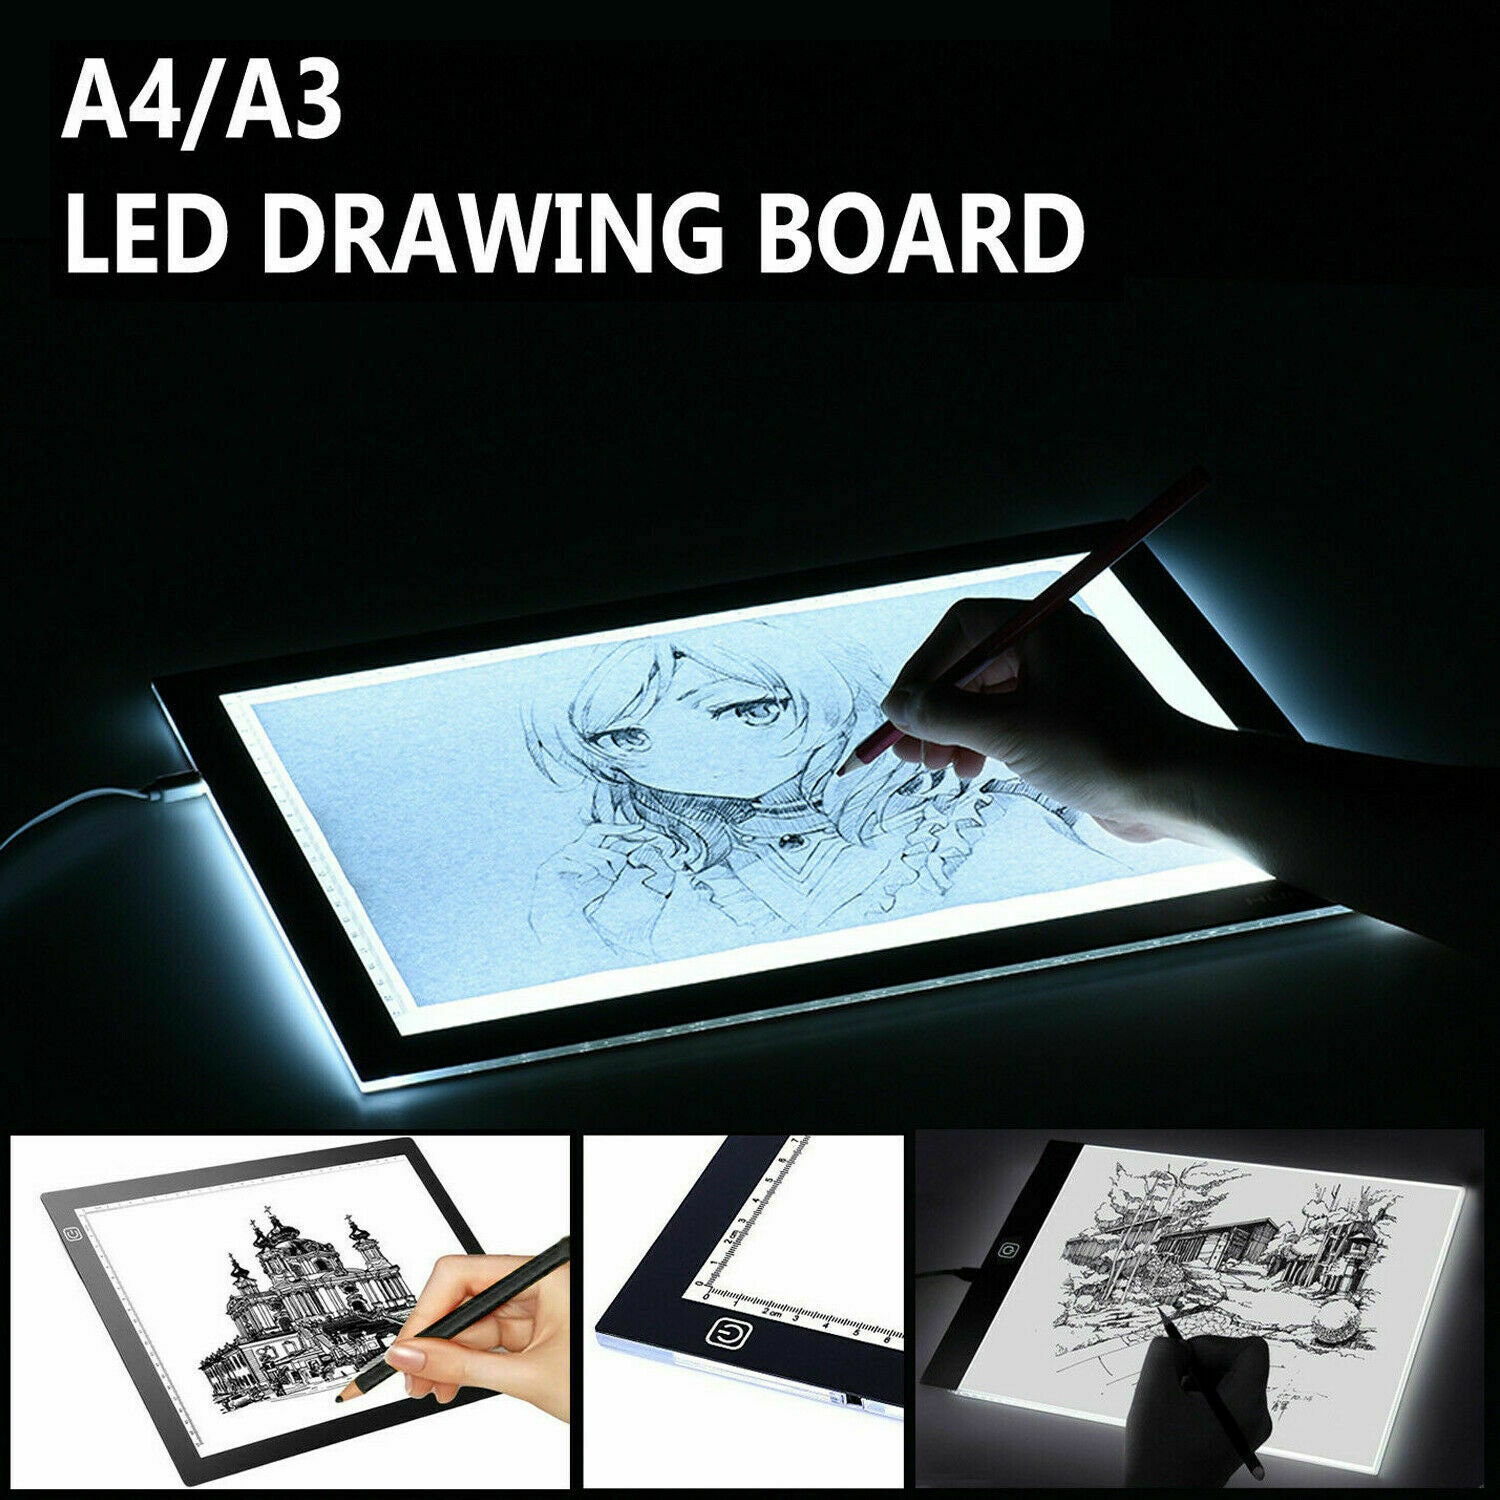 LED Tracing Board by Peter Pauper Press